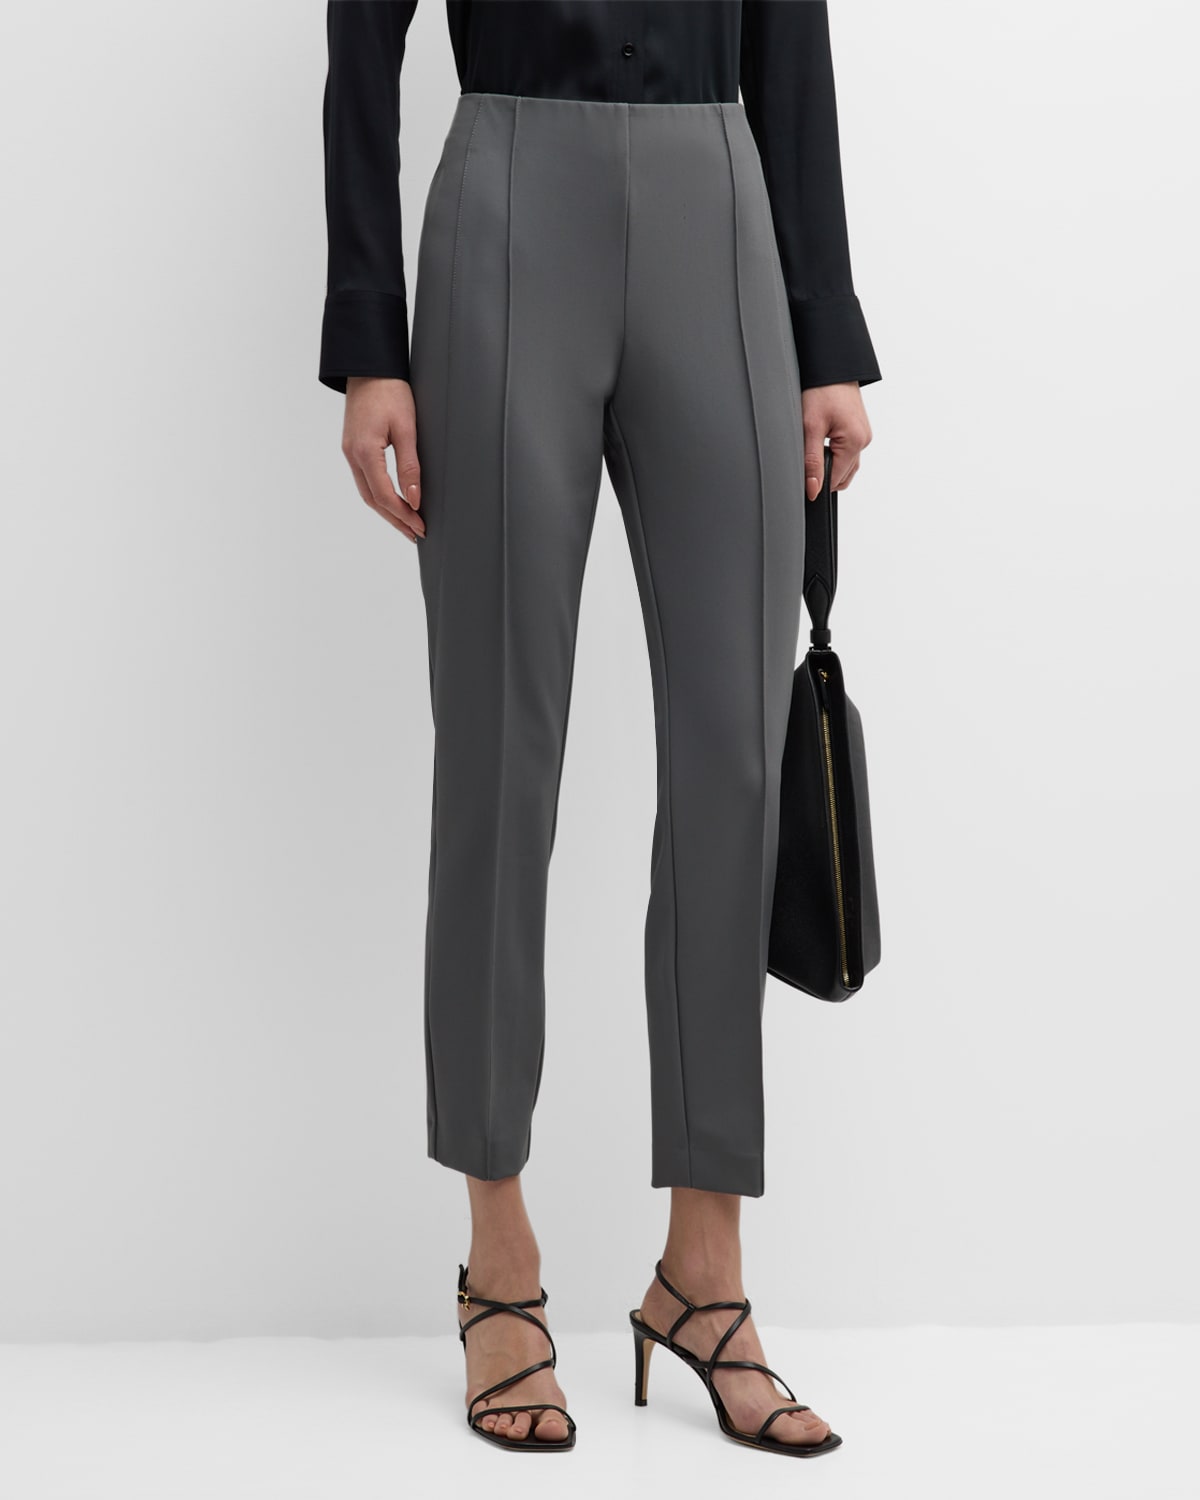 Lafayette 148 Petite Acclaimed Stretch Gramercy Pant In Shale